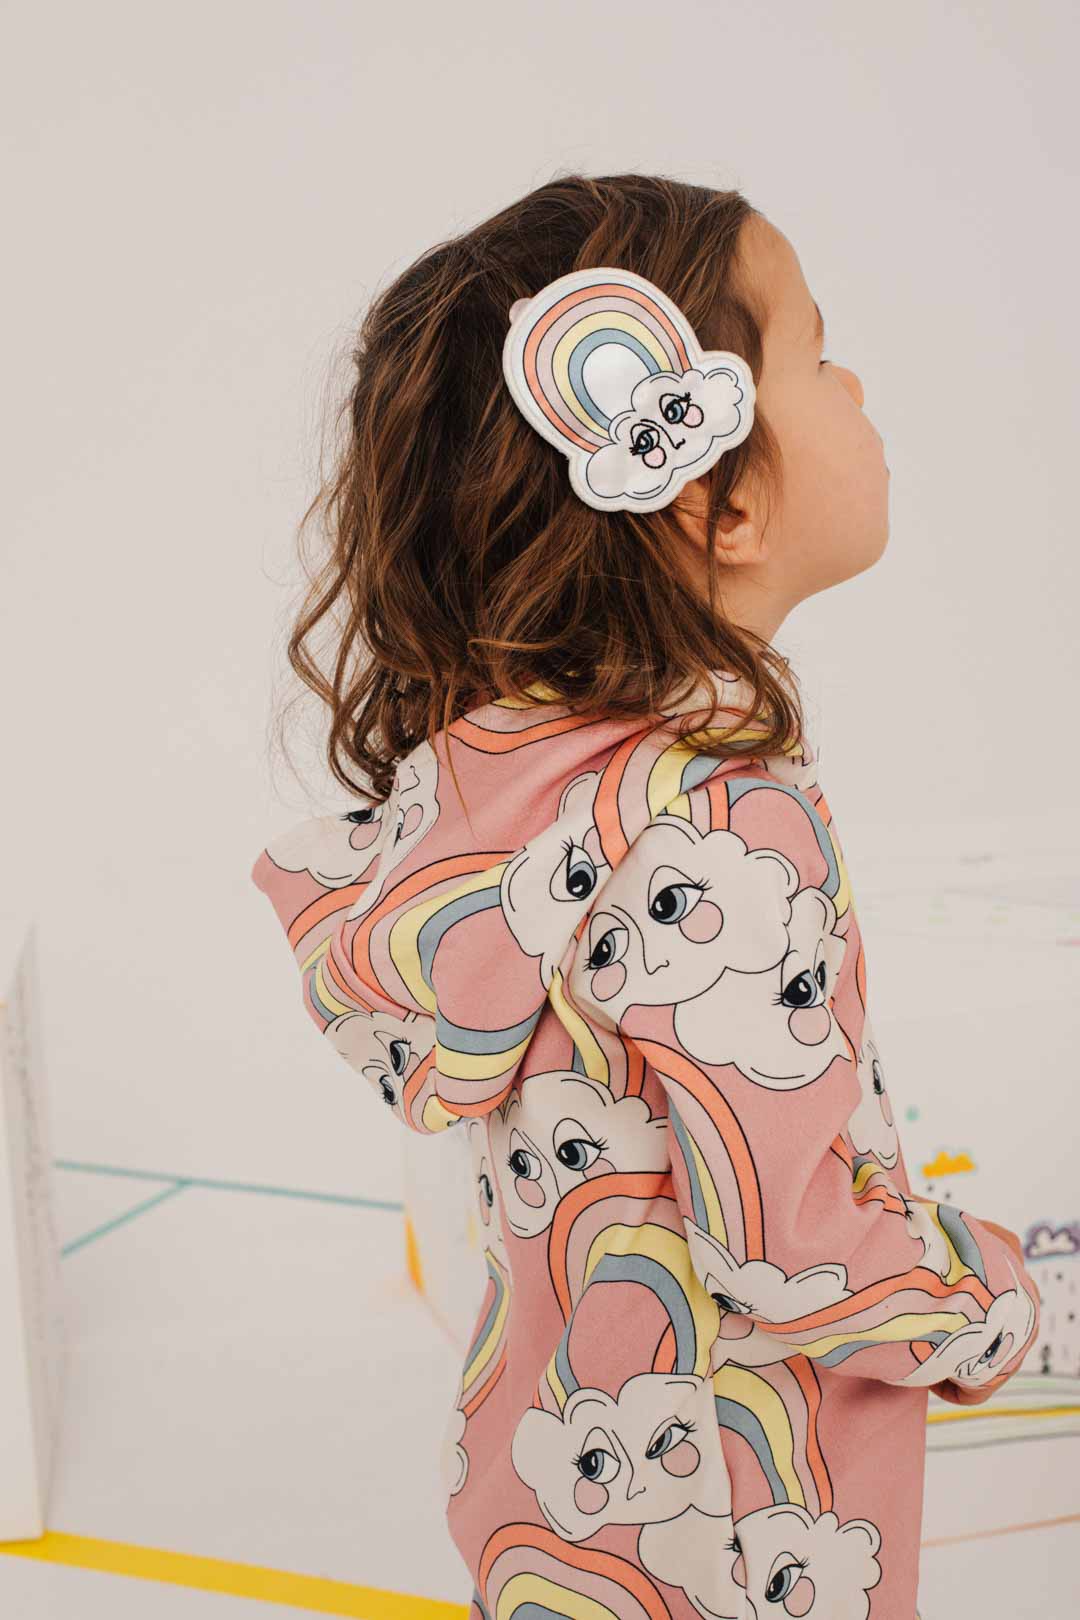 Rainbow Pink Overall - LAST ONE 3-4 years